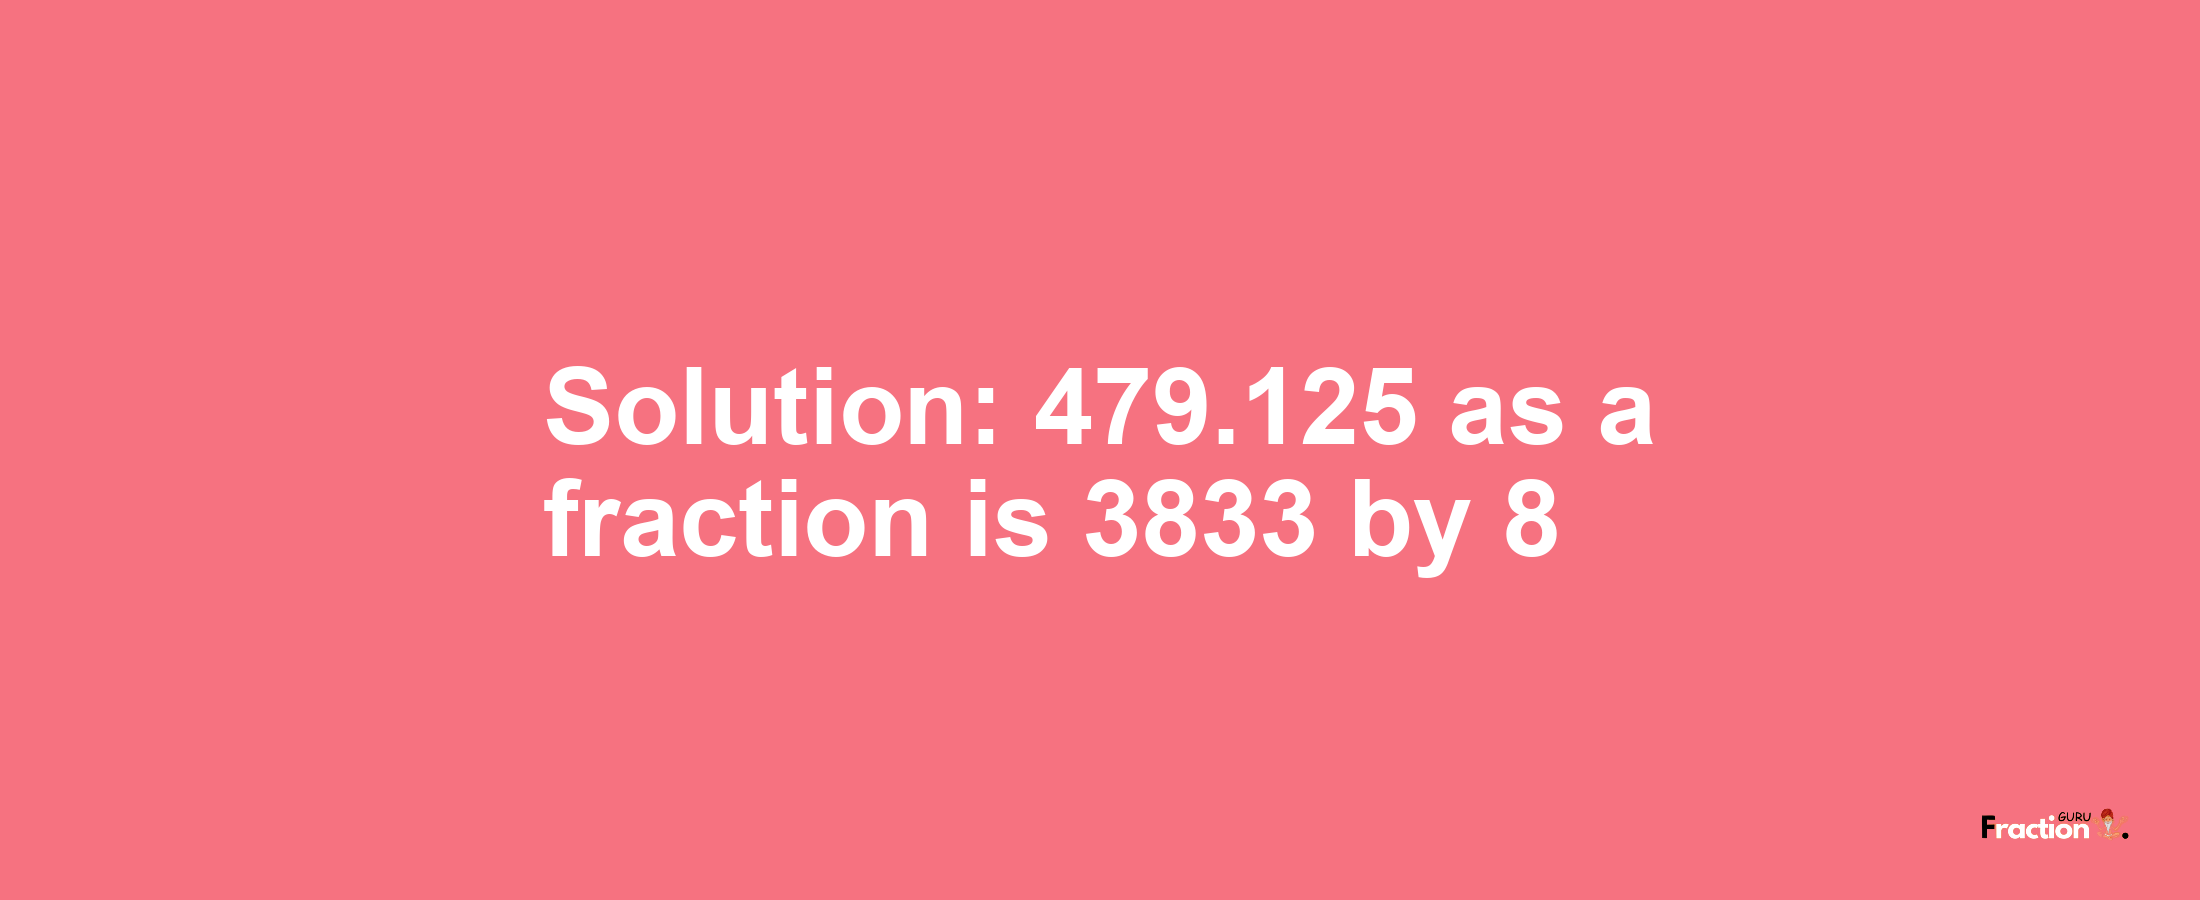 Solution:479.125 as a fraction is 3833/8